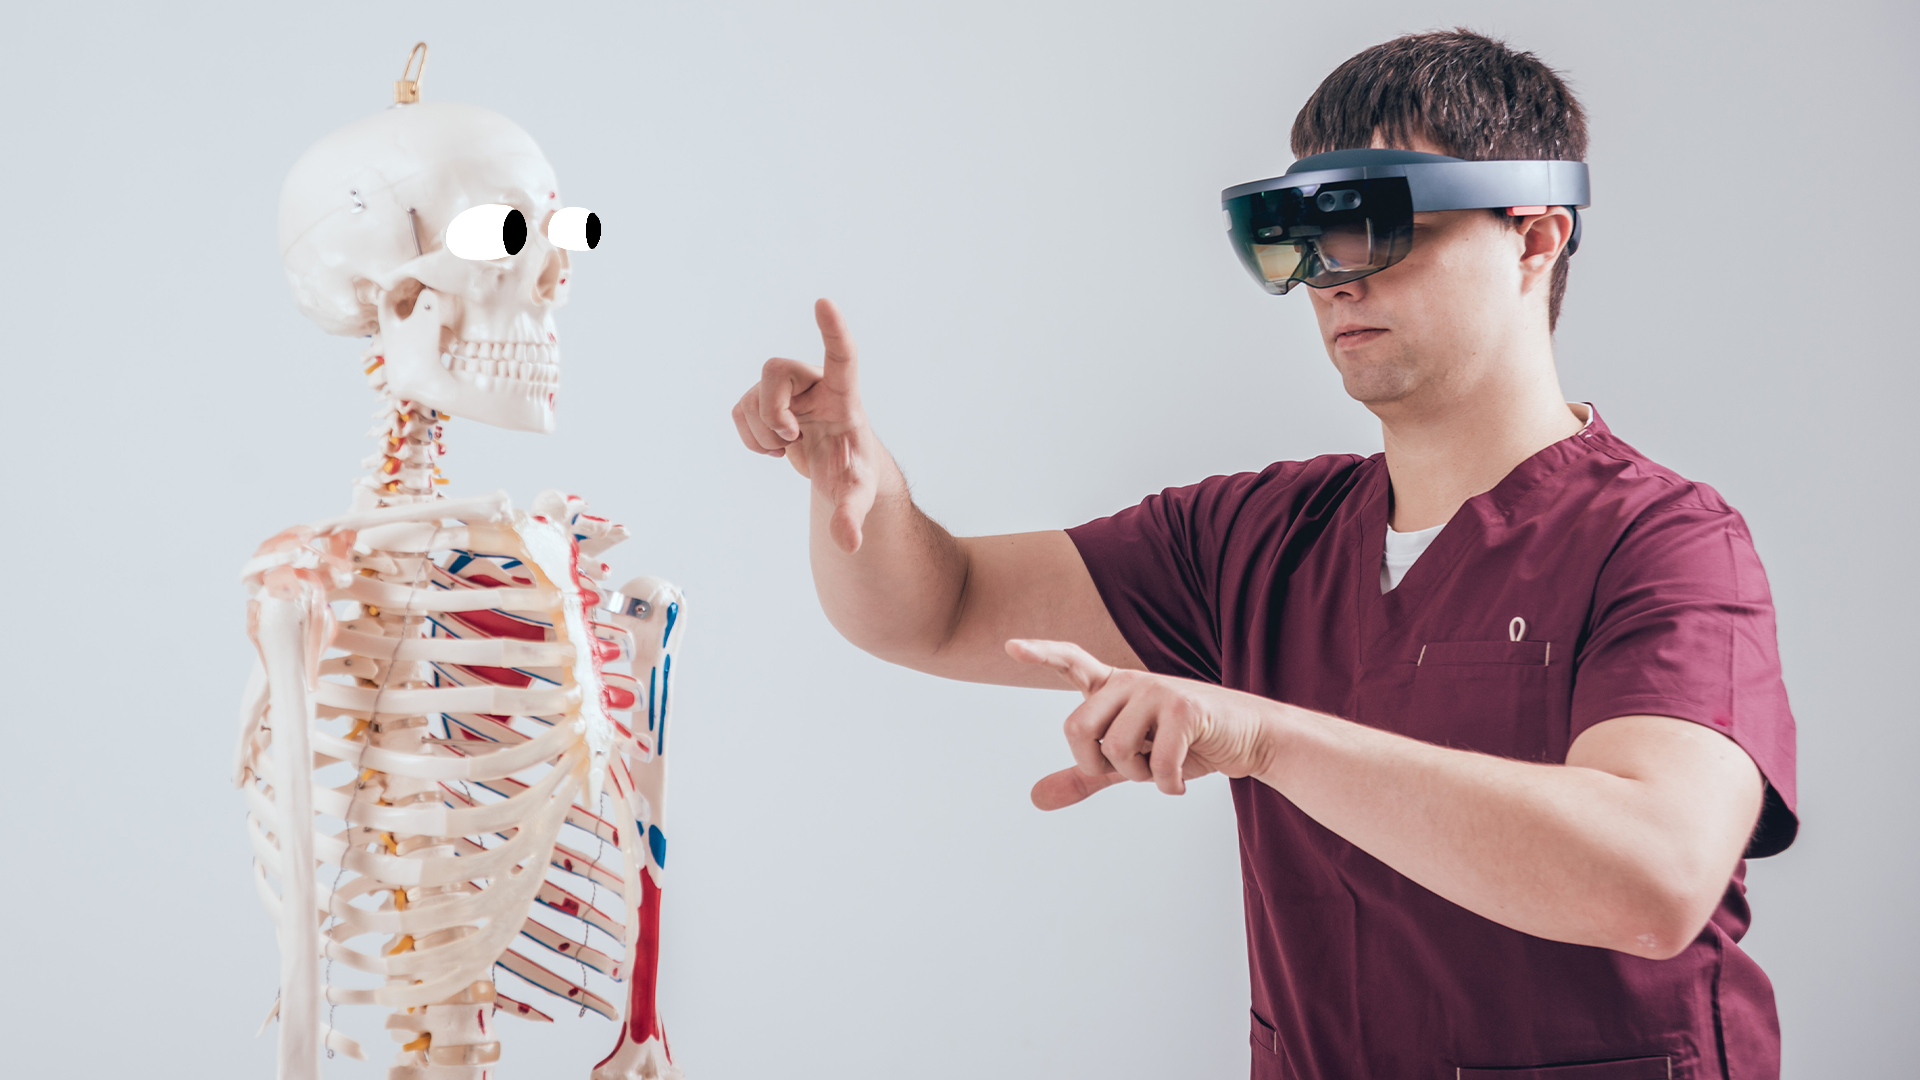 Skeleton with a guy wearing a VR headset